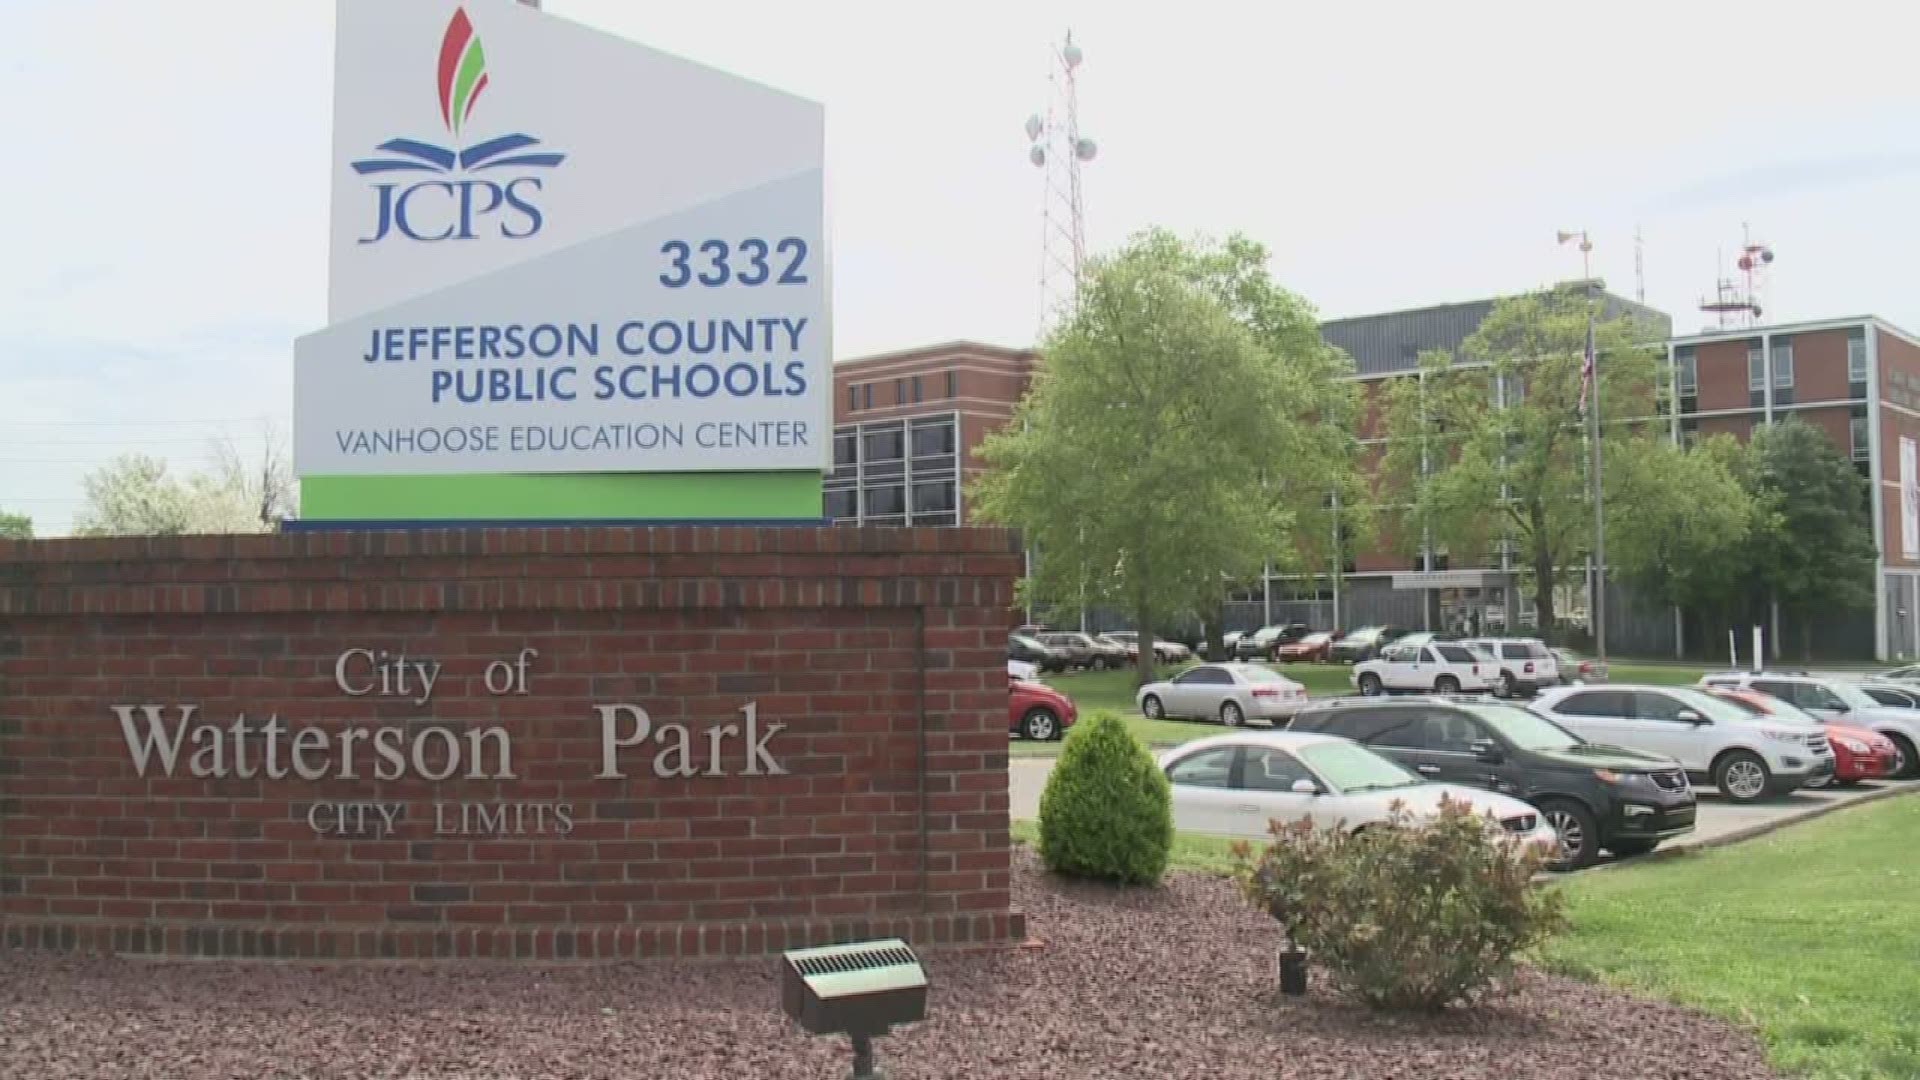 The district is putting together its policy for a new in-house security force. Will JCPS arm its school resource officers?